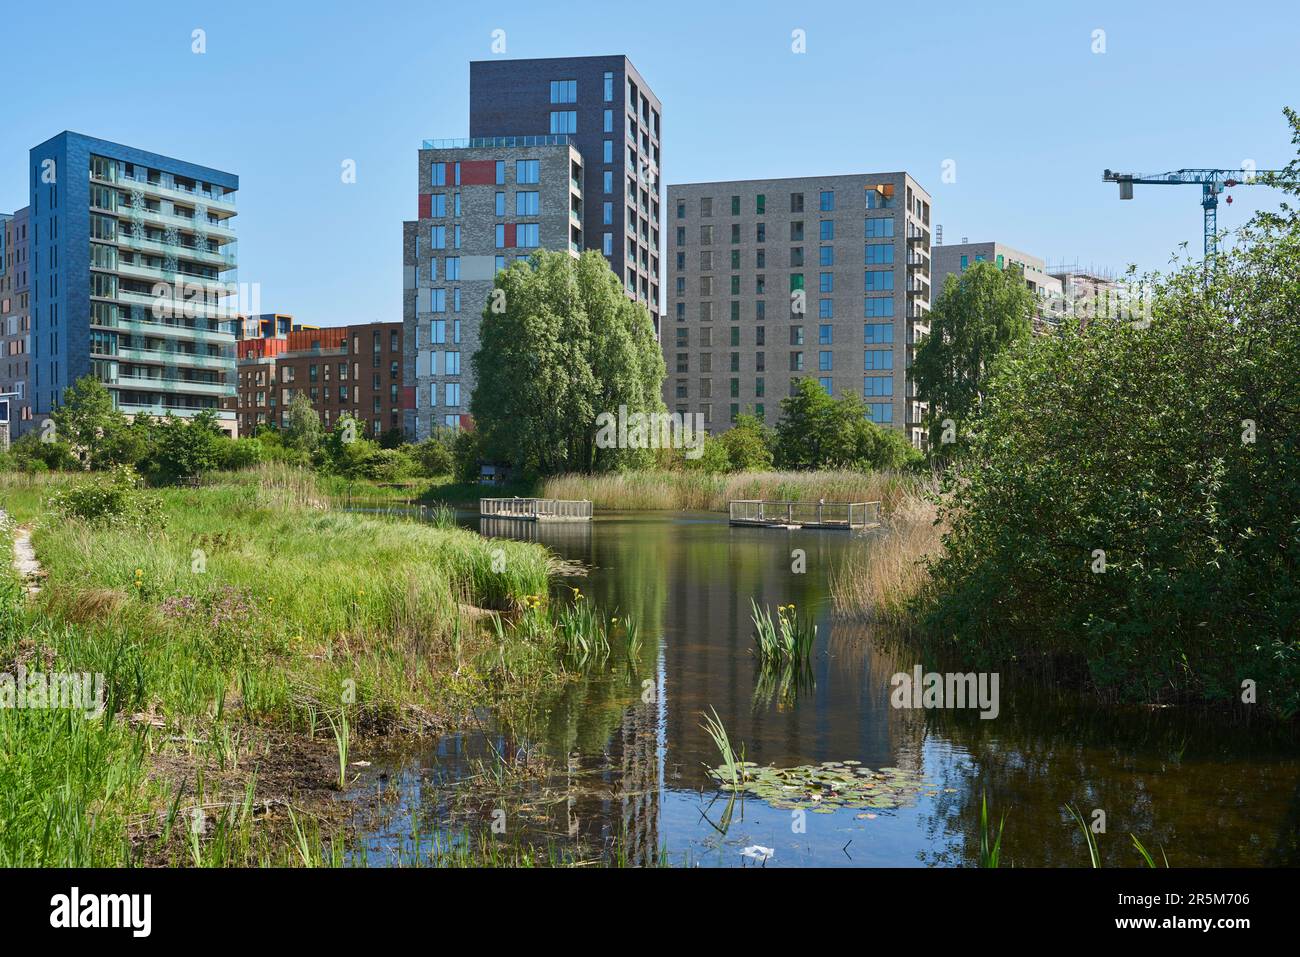 Greenwich Peninsula Ecology Park, London UK, in summertime, with new apartment buildings in the background Stock Photo